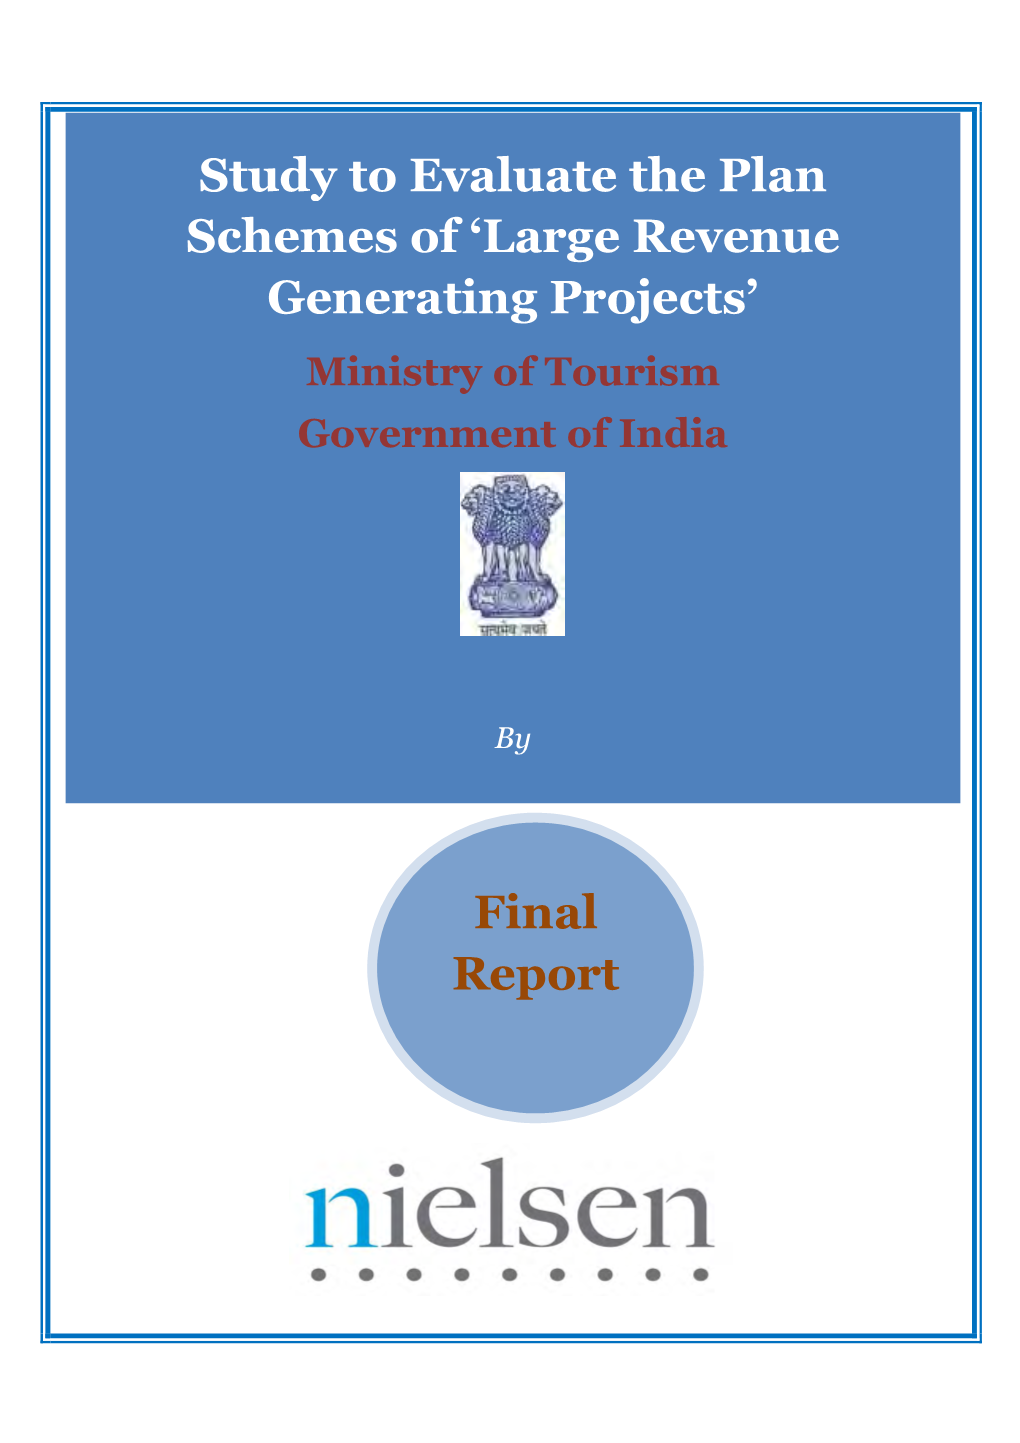 Study to Evaluate the Plan Schemes of 'Large Revenue Generating